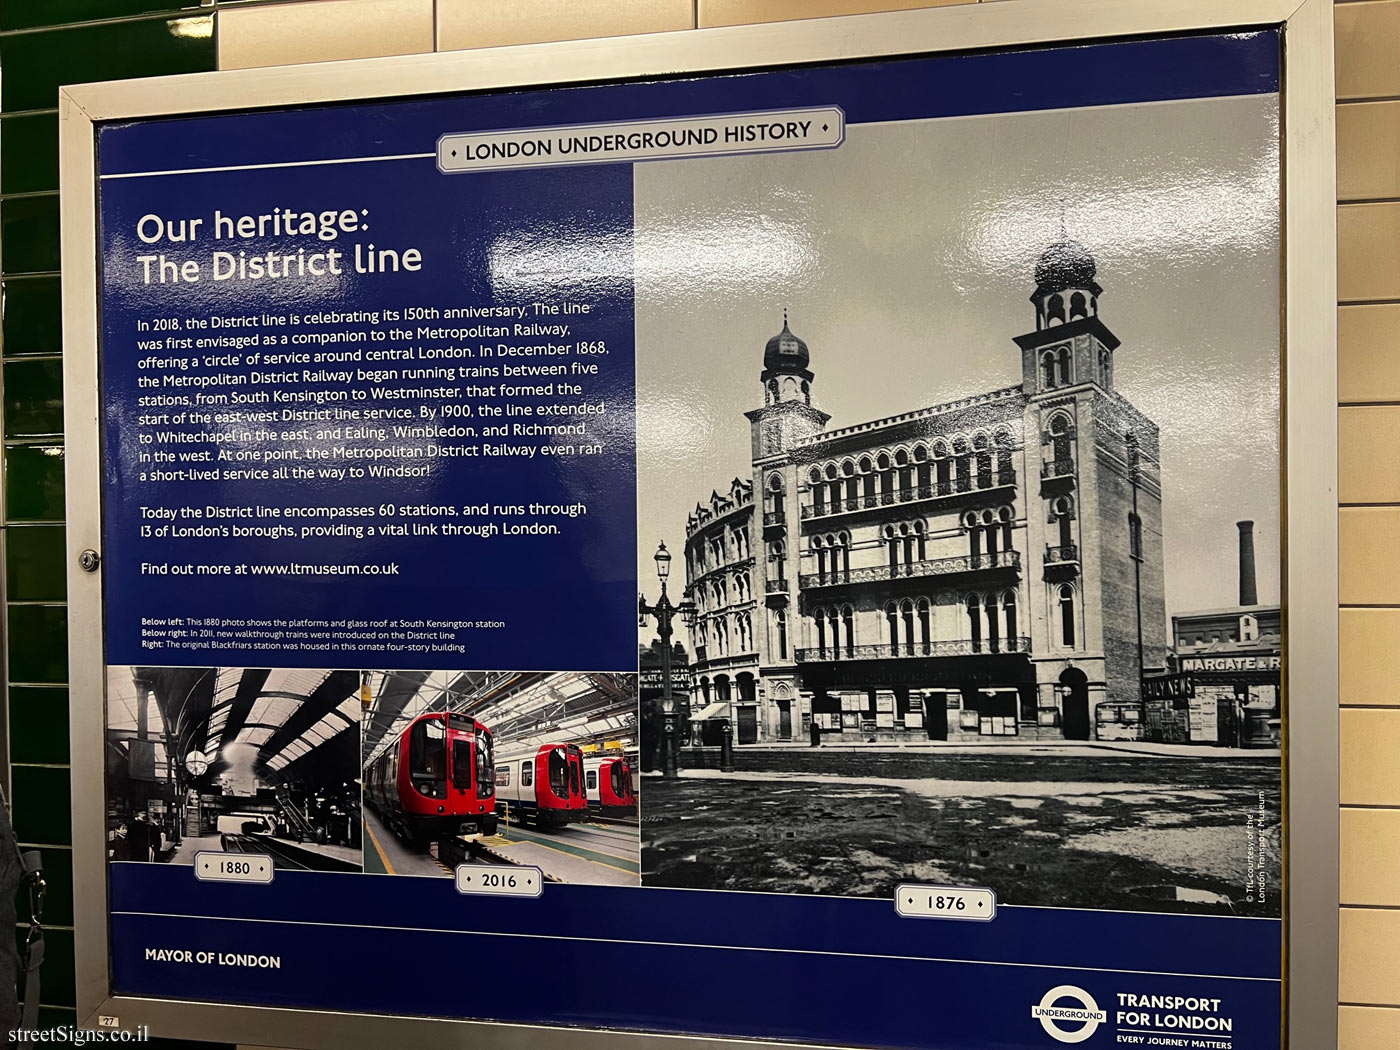 London -  London Underground History - Our heritage: The District line